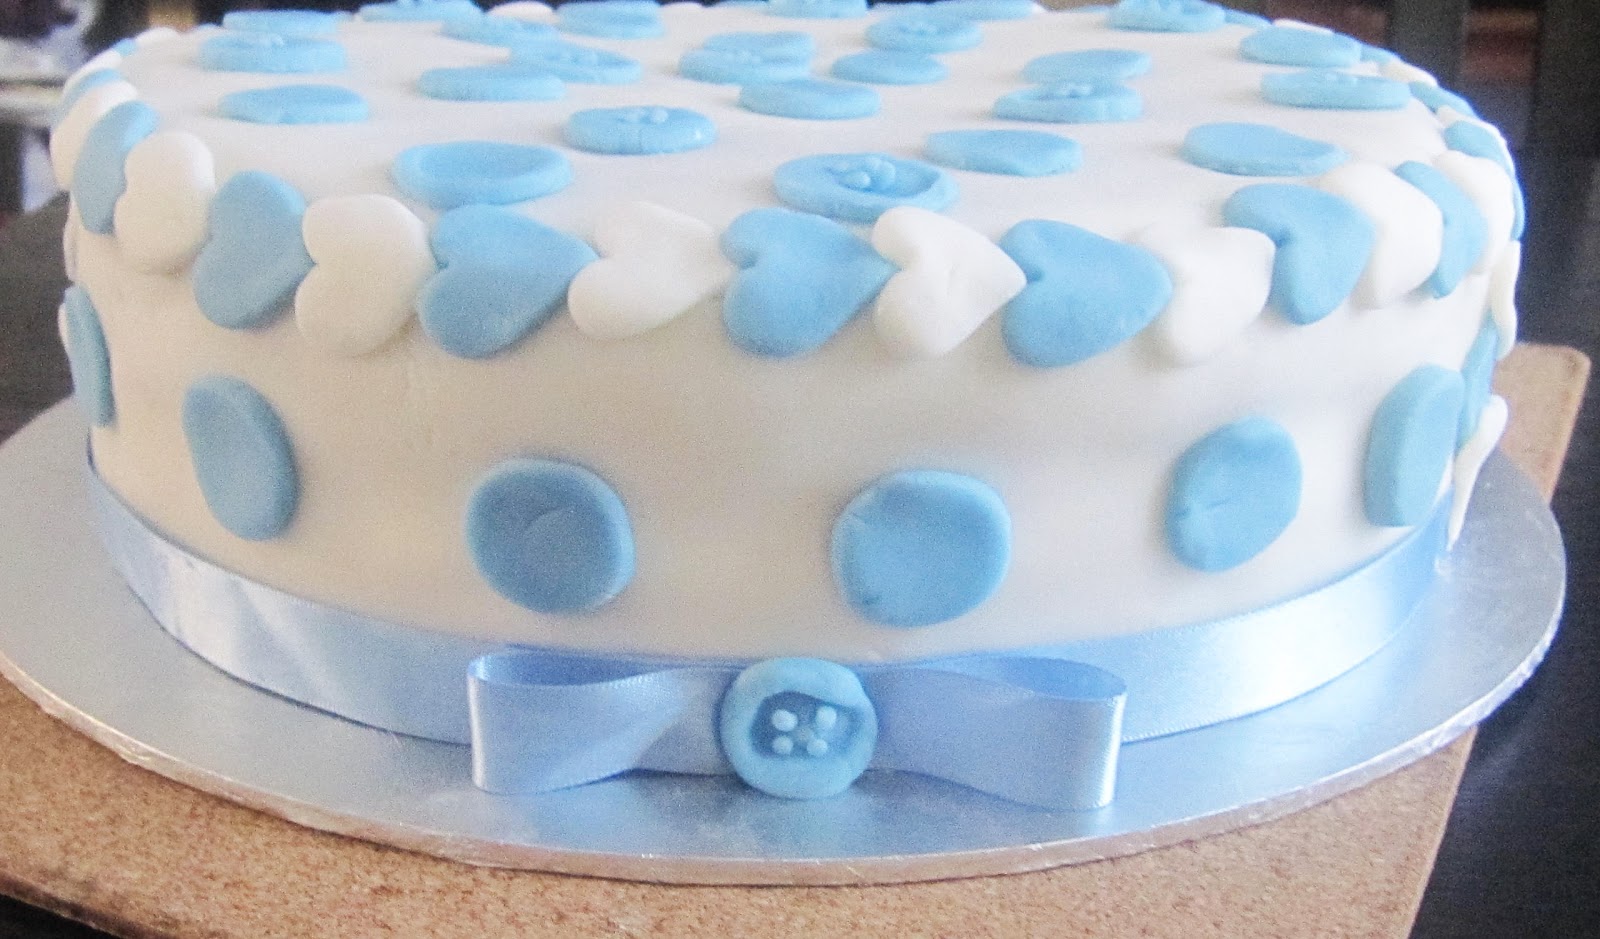 It's A Boy: Baby Shower Cakes